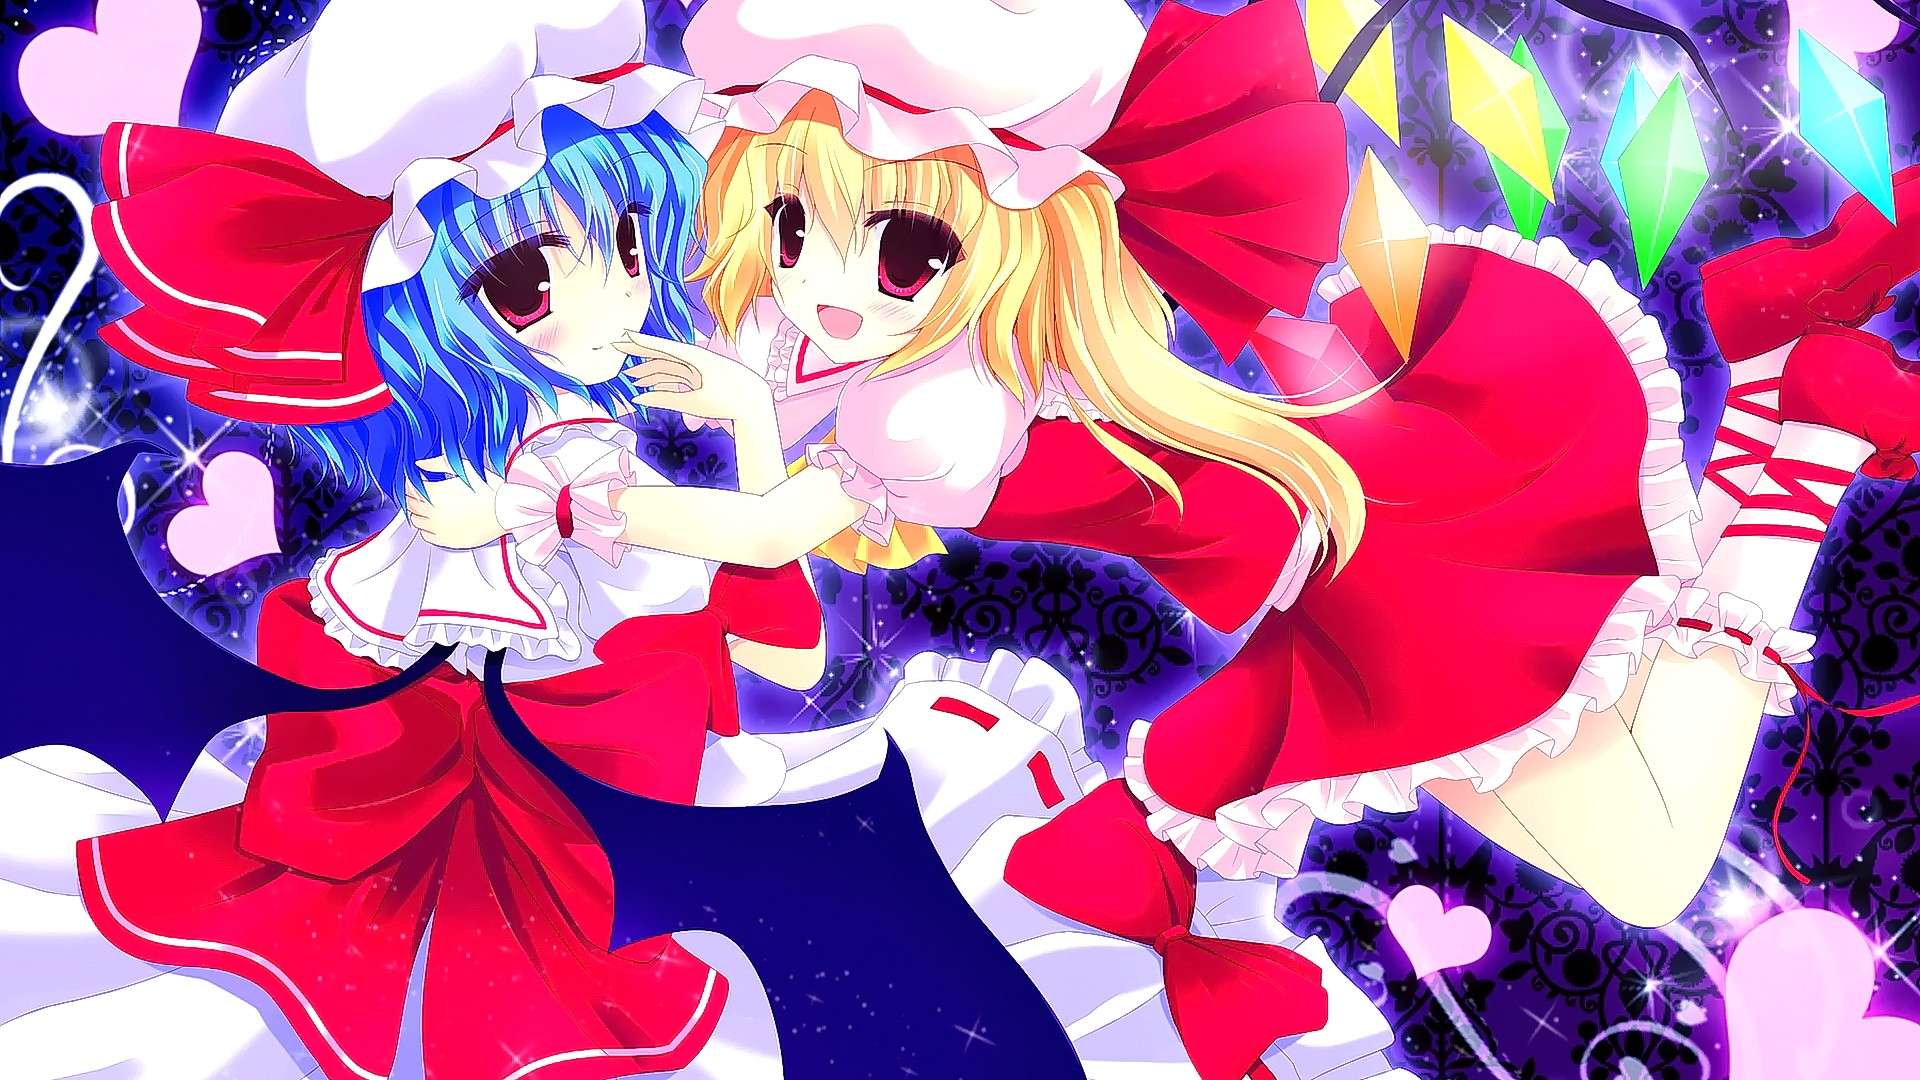 Anime 1920x1080 anime anime girls blonde smiling blue hair hat looking at viewer Touhou Flandre Scarlet Remilia Scarlet two women long hair open mouth women with hats dress